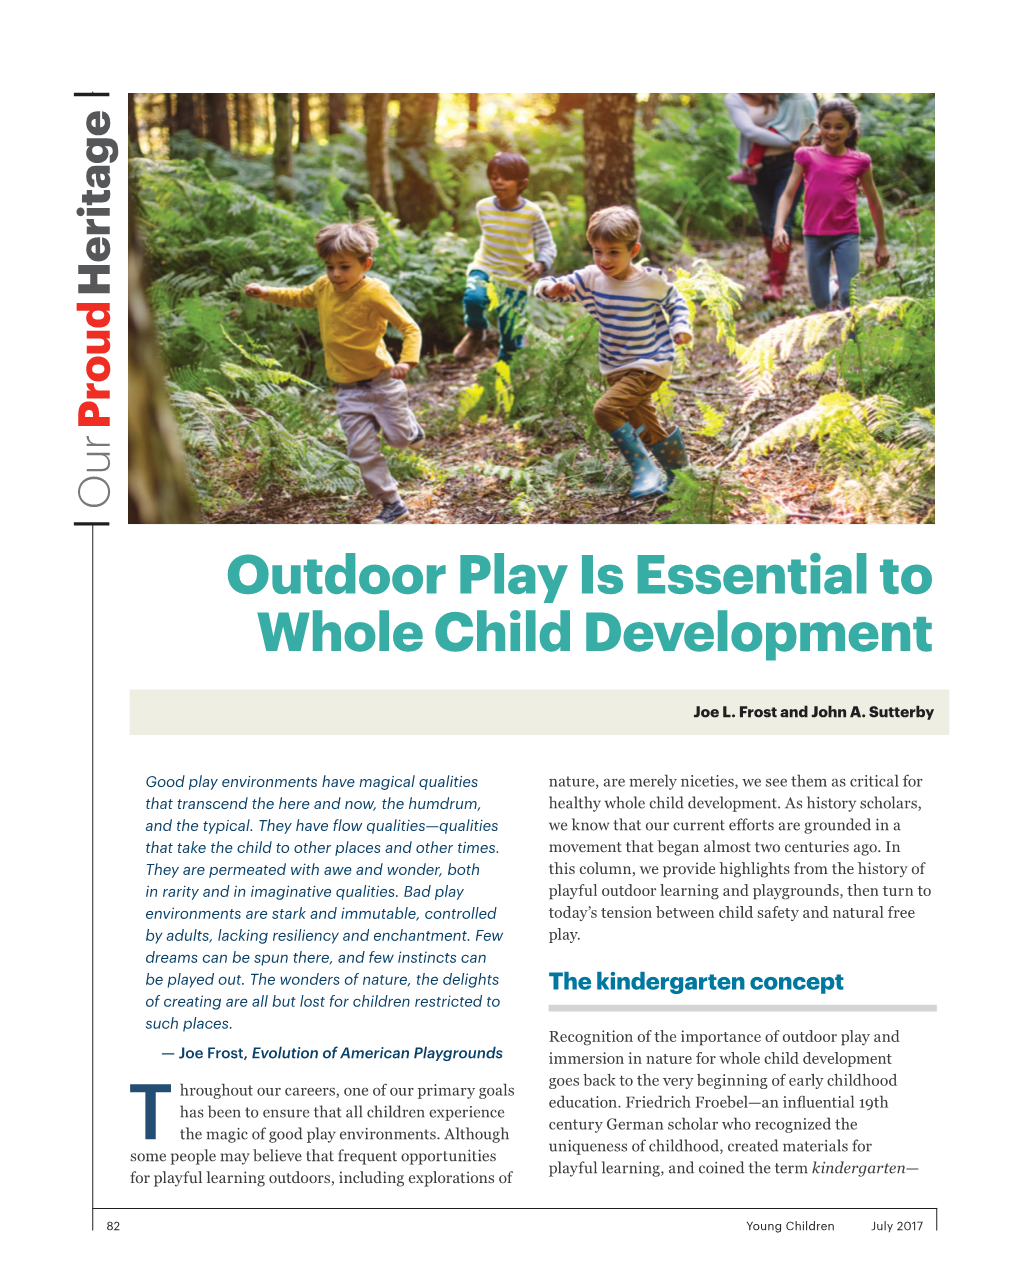 Outdoor Play Is Essential to Whole Child Development